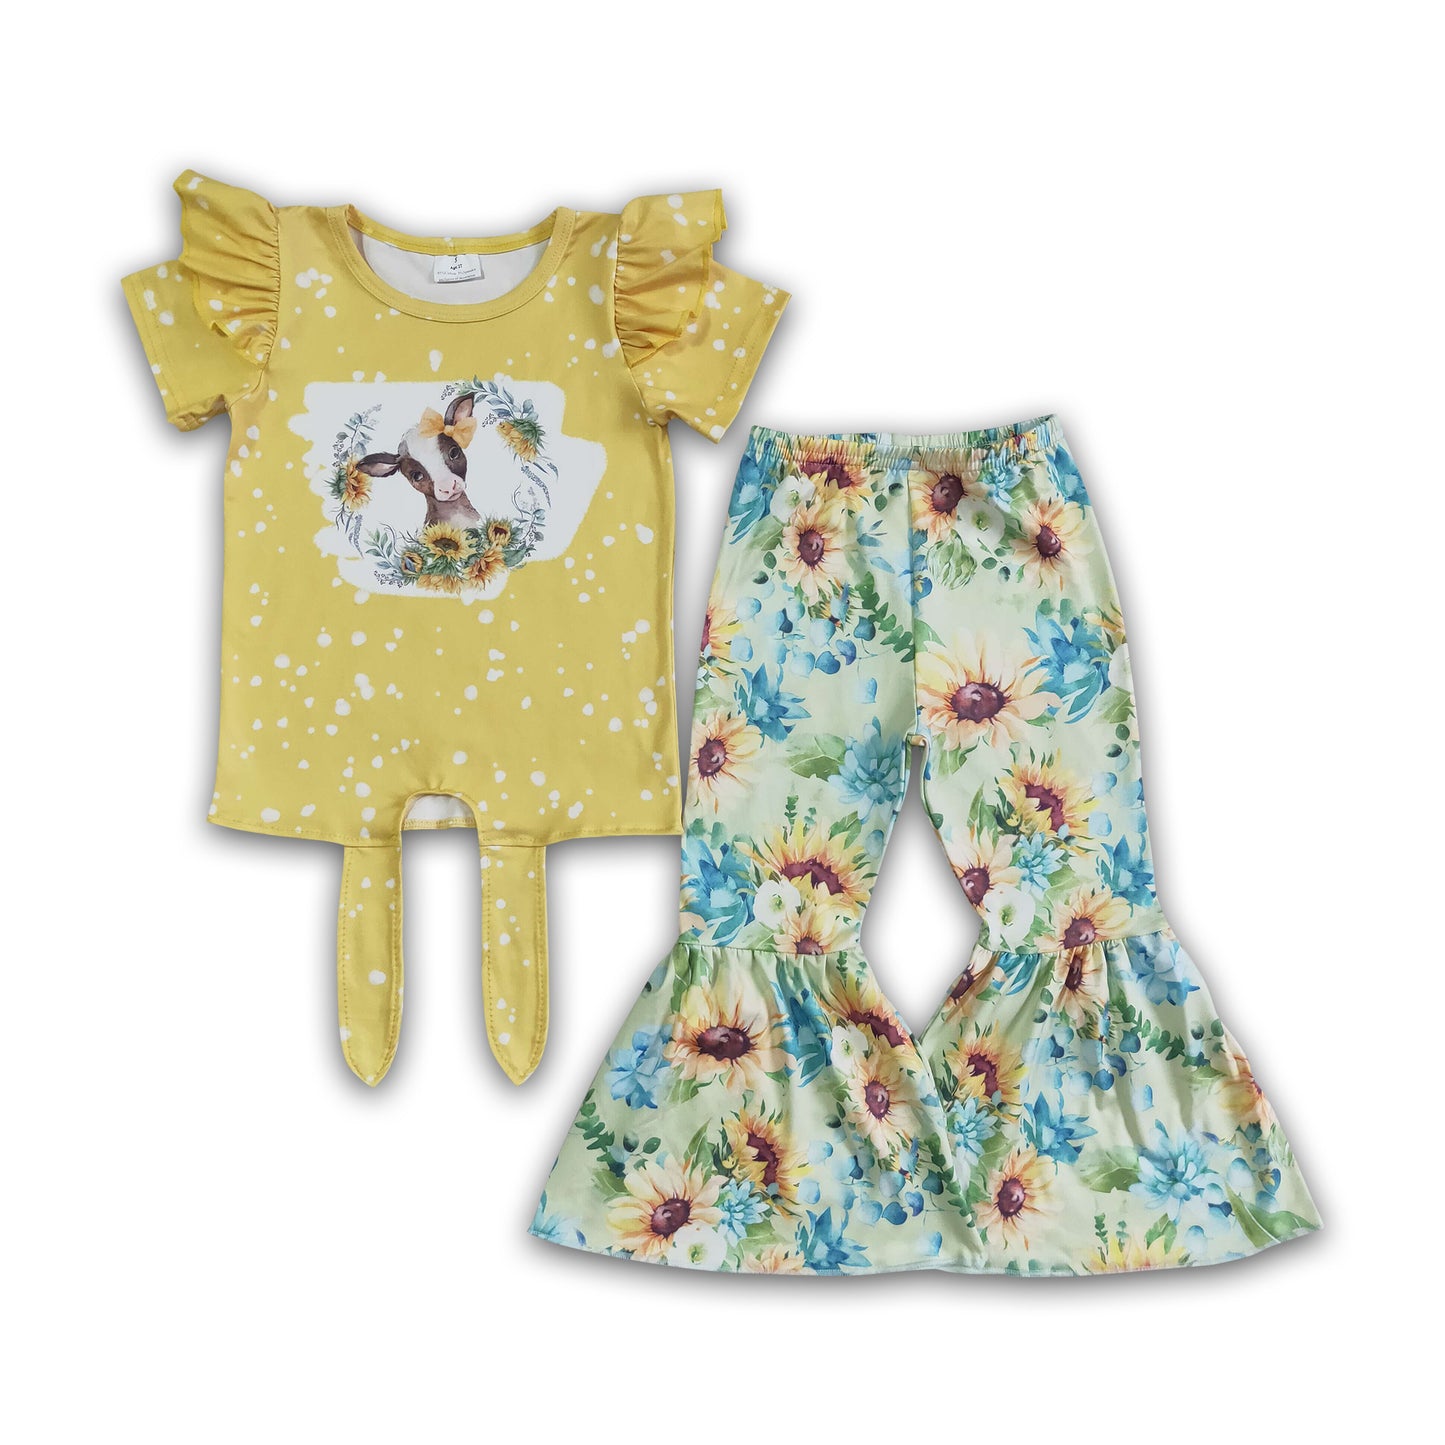 Cow sunflower bell bottom pants baby children clothes